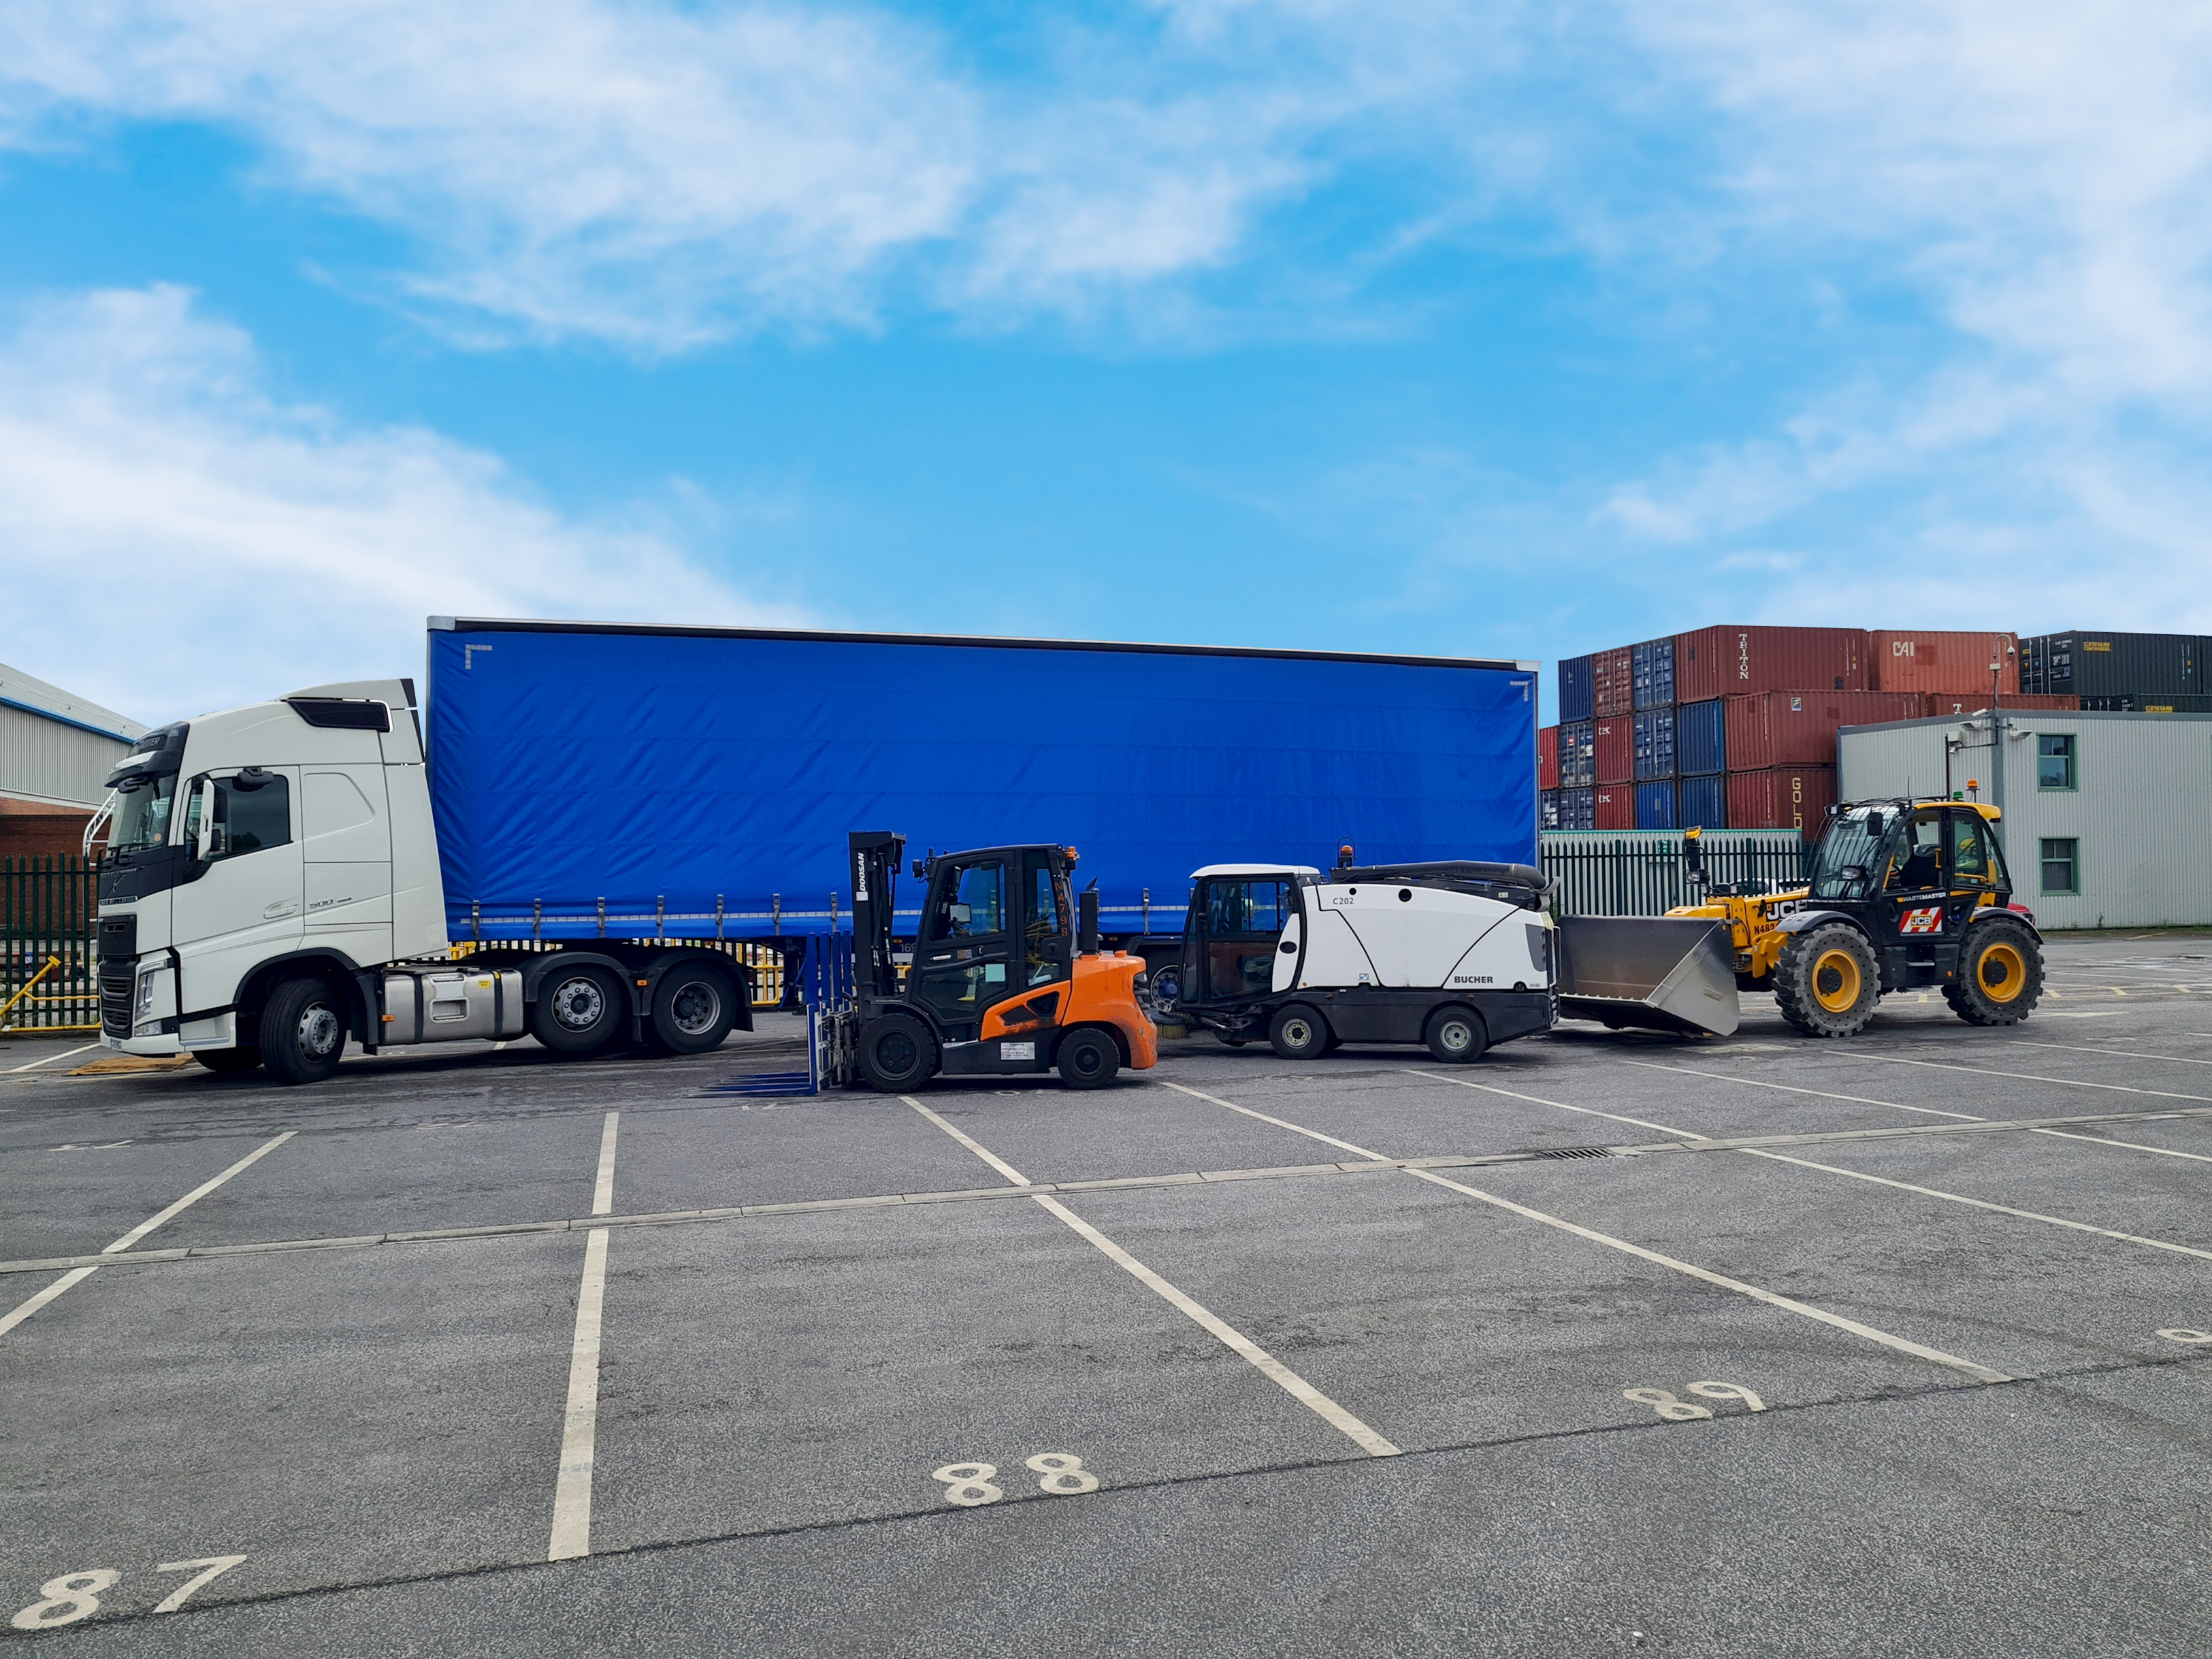 Dawsongroup’s 24-hour Solution for Verallia - truck and trailer, forklift, sweeper and JCB Wastemaster